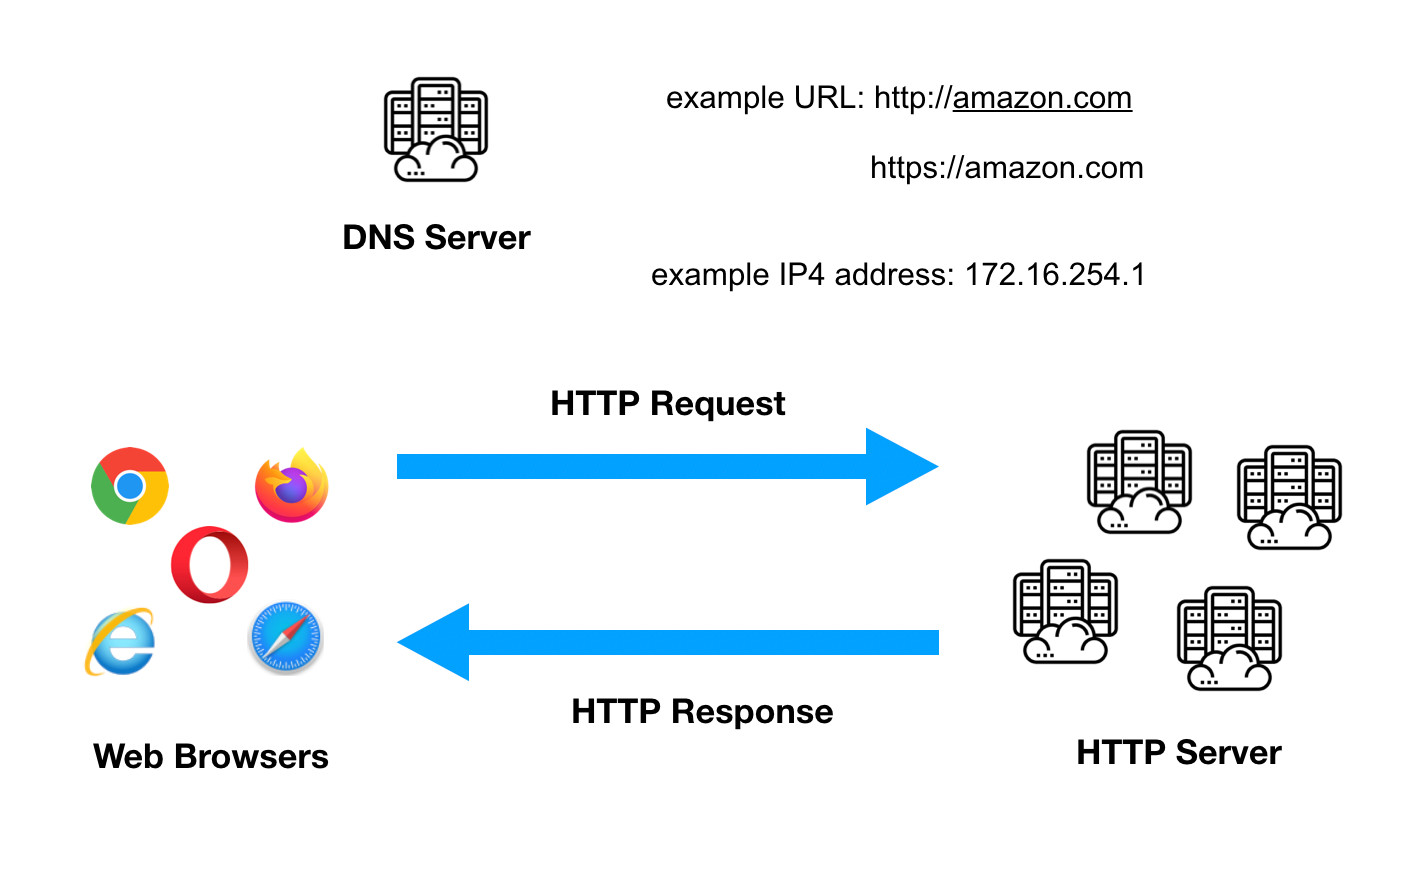 fig 2. HTTP request and response